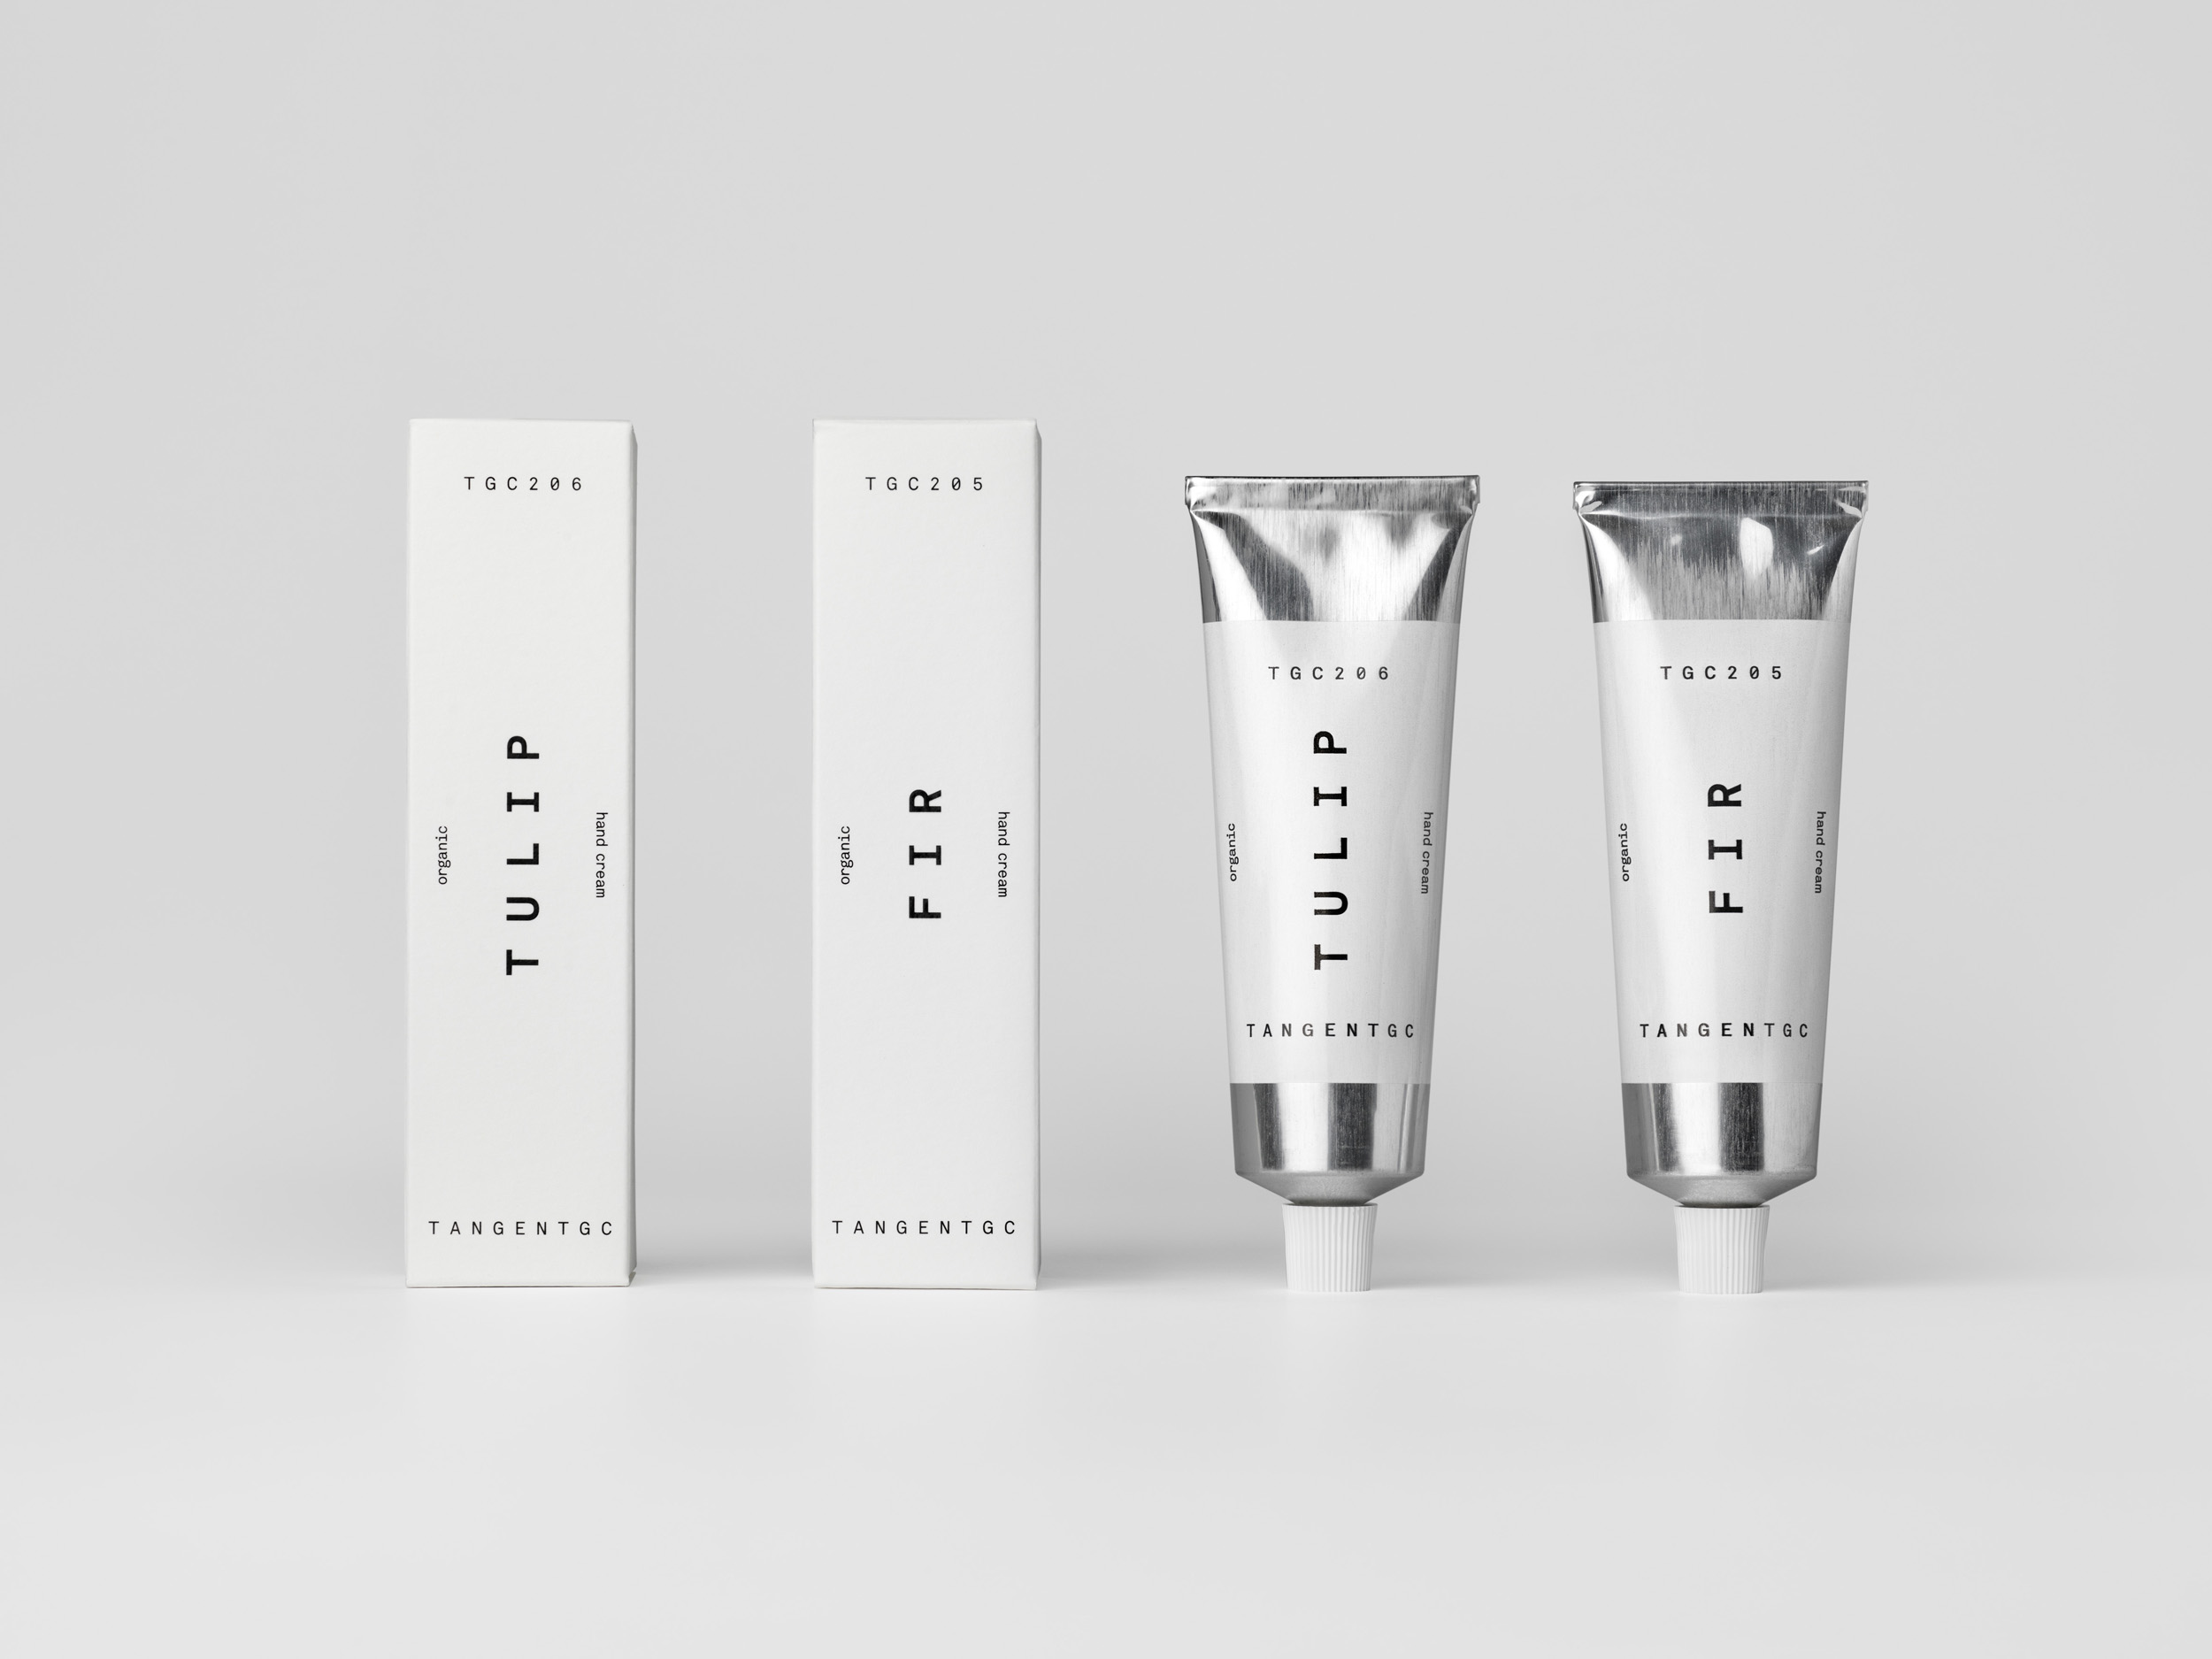 Check Out the Elegant Minimal Packaging For This Hand